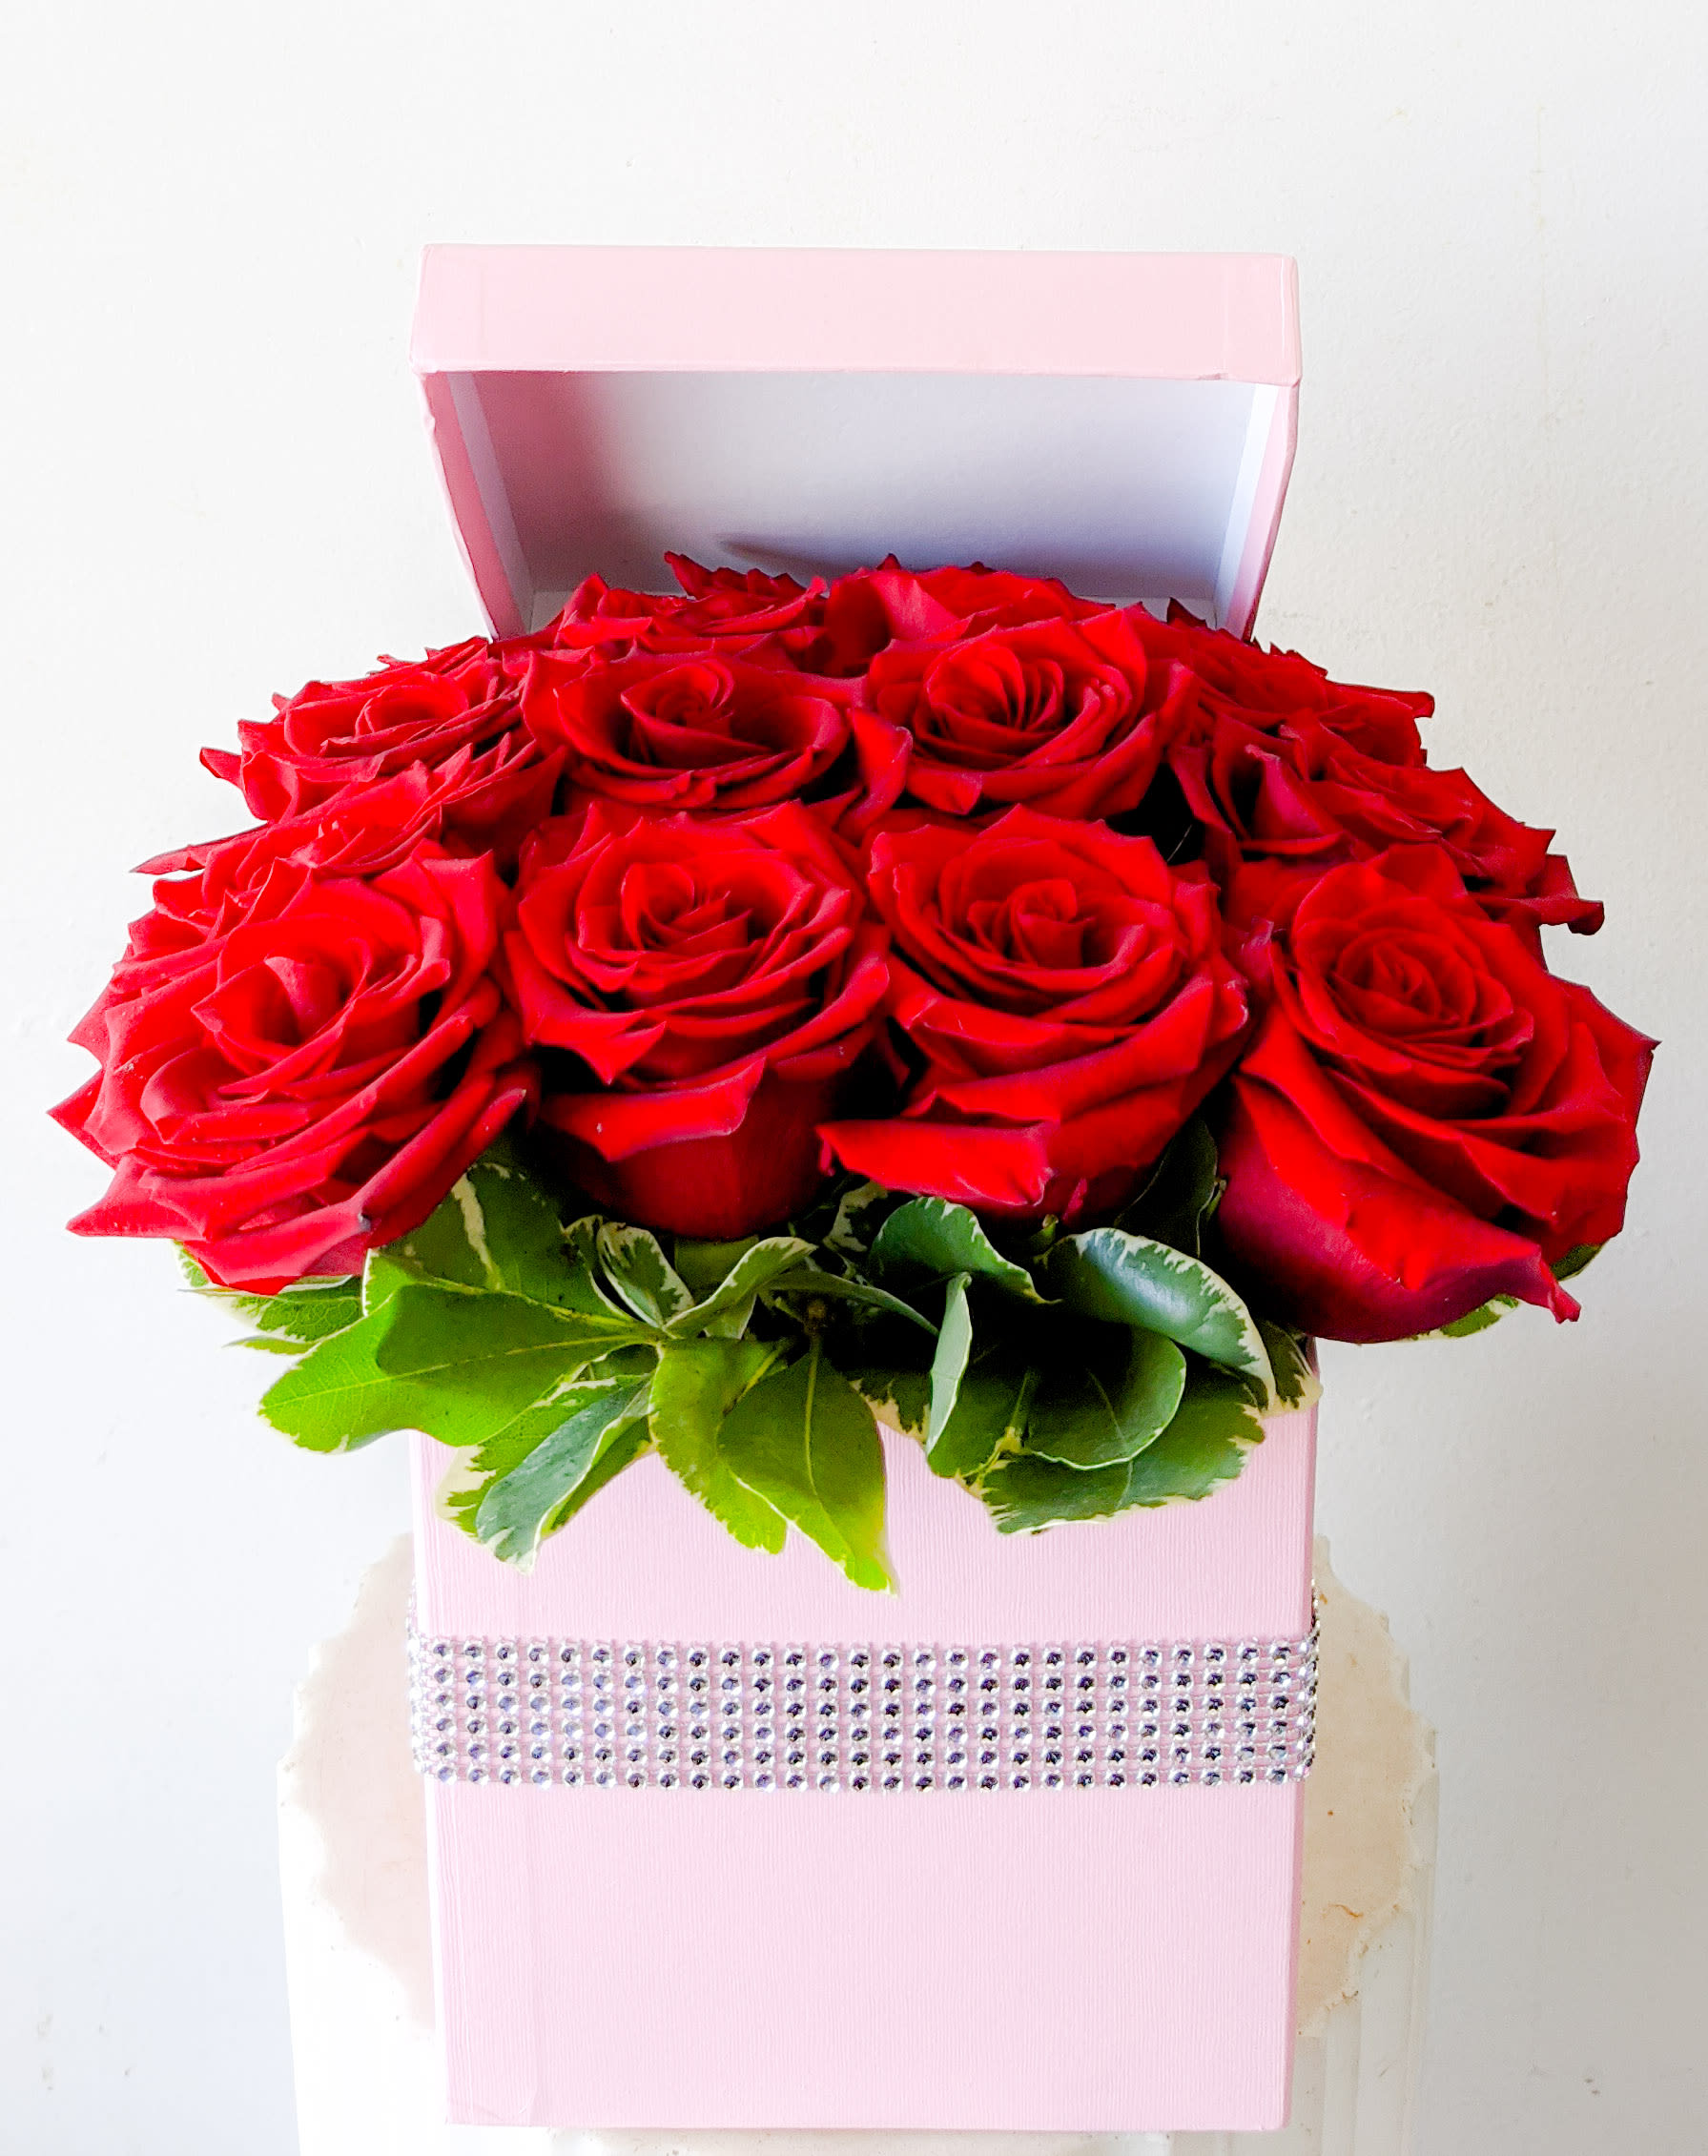 Box of Red Roses - 16 red roses in an elegant square gift box with jewel cuff accent.